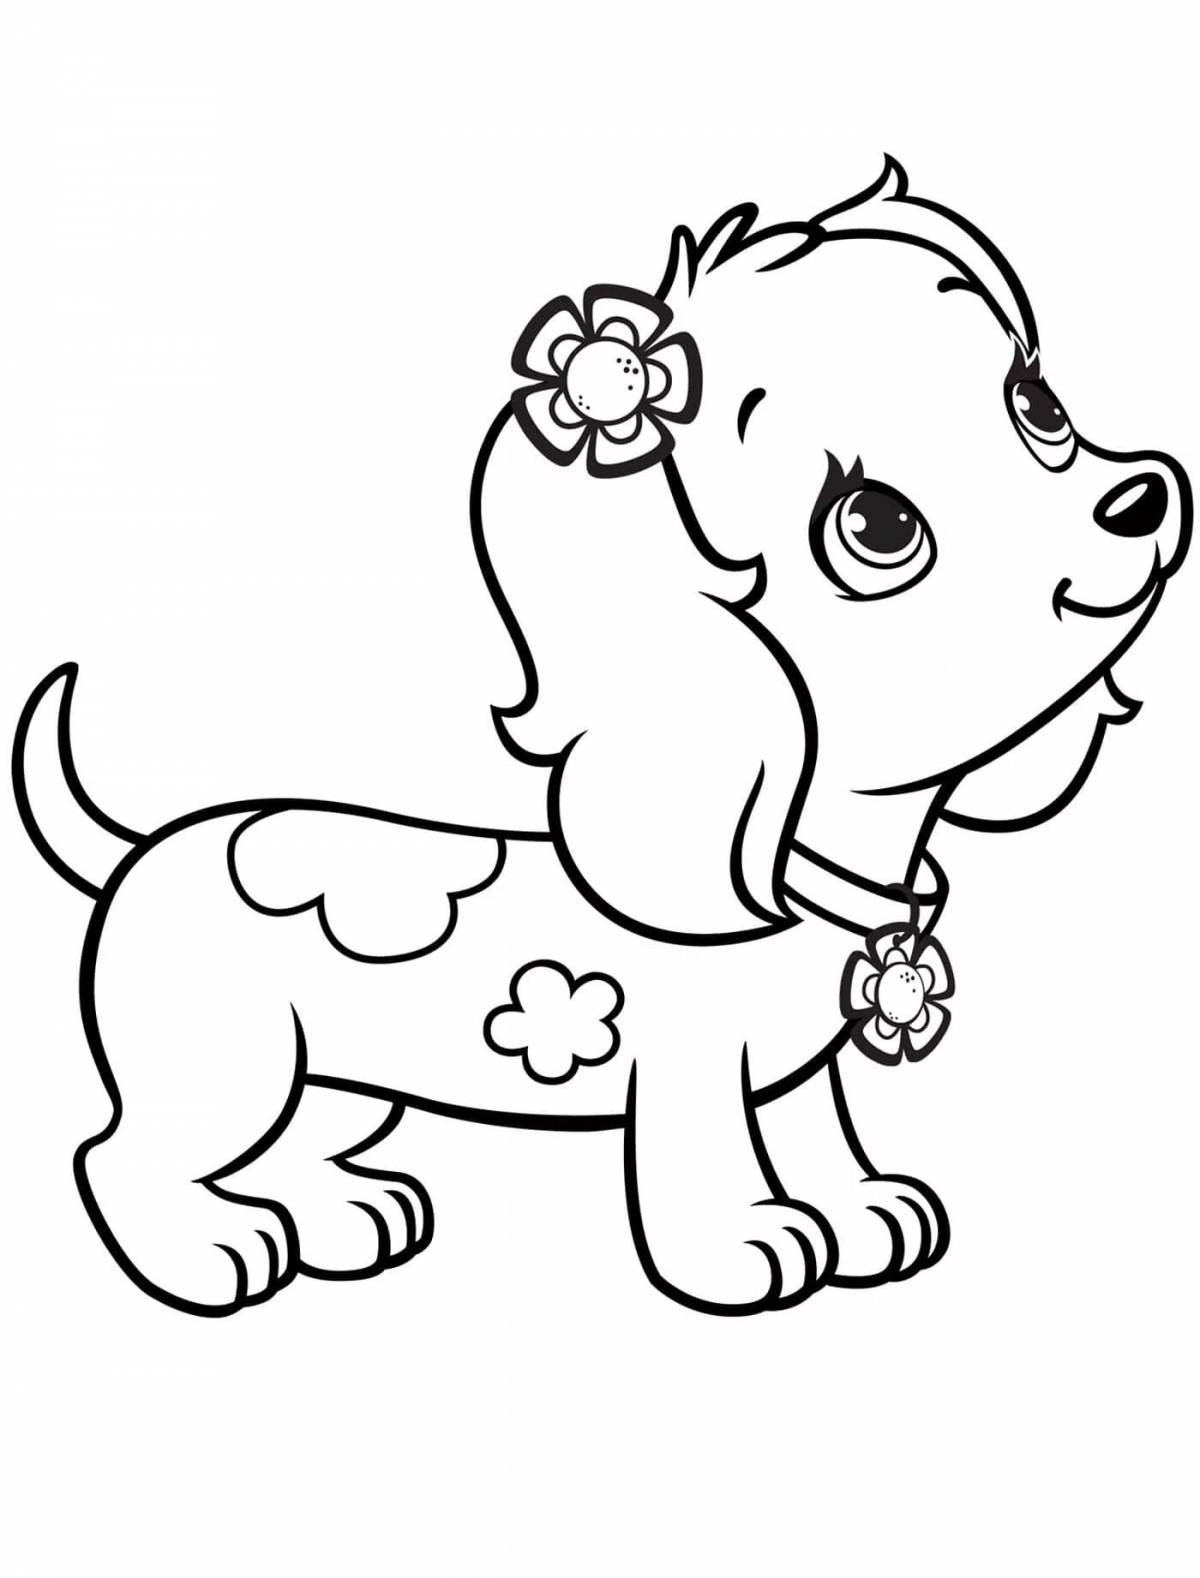 Cute dog coloring book for kids 3 4 years old